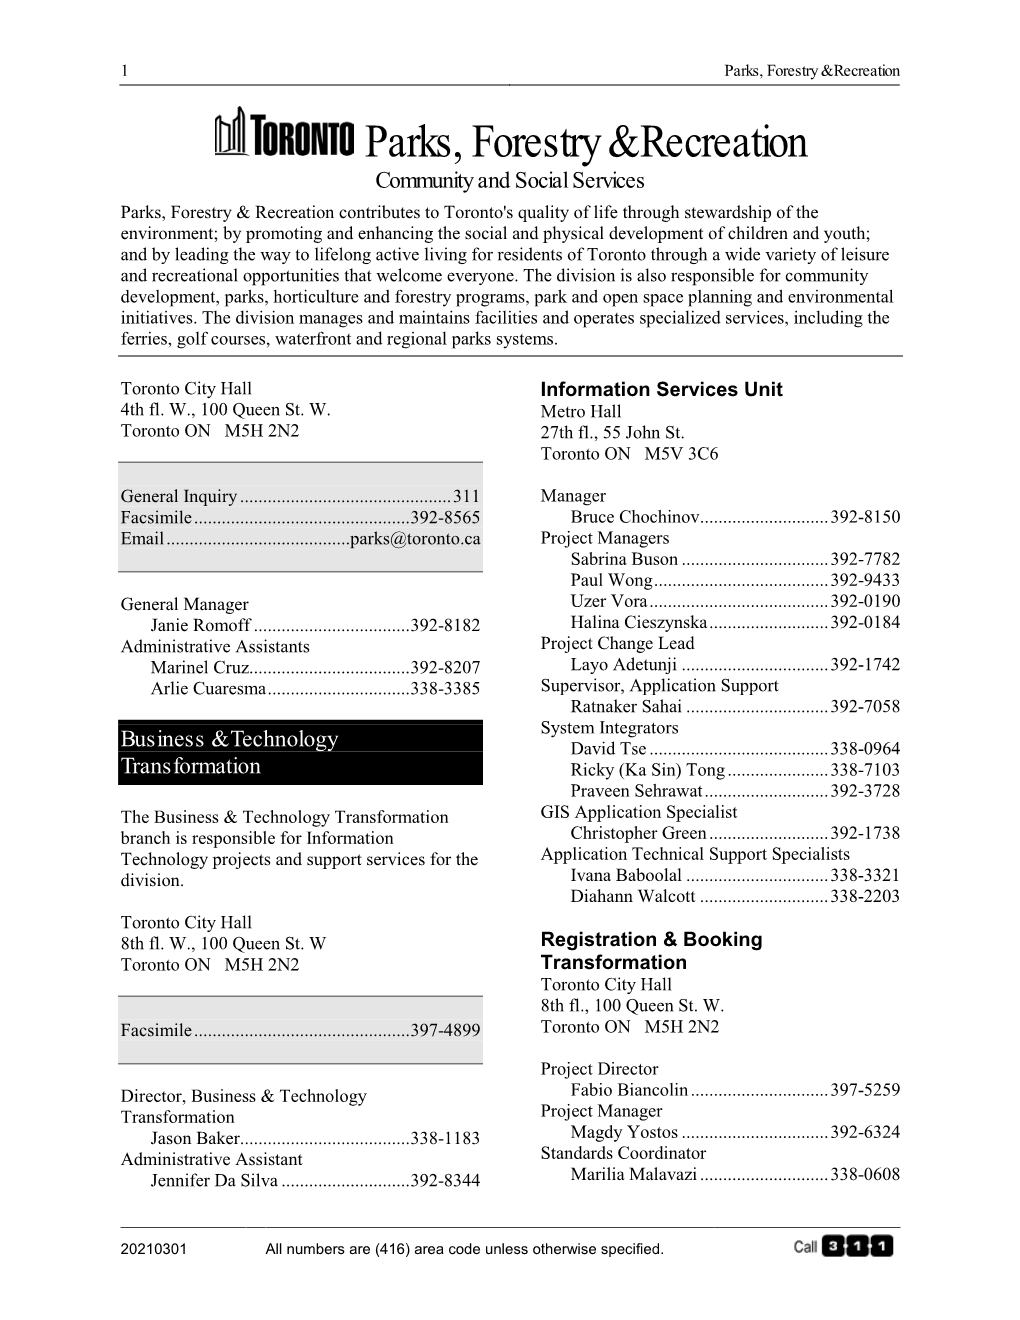 Parks, Forestry & Recreation Telephone Directory